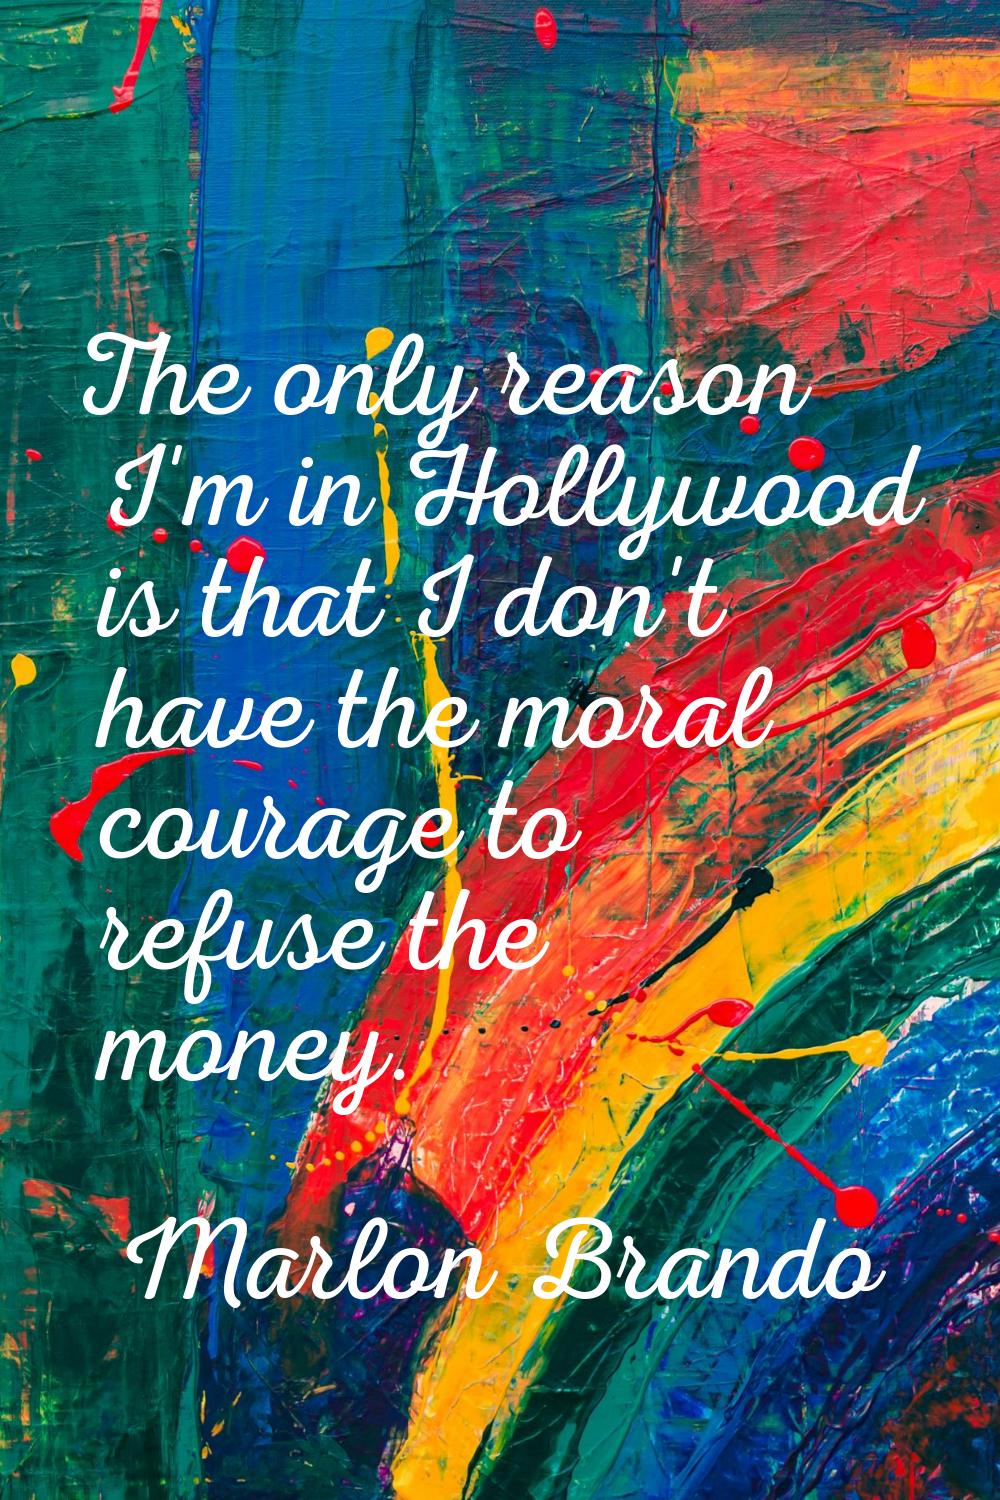 The only reason I'm in Hollywood is that I don't have the moral courage to refuse the money.